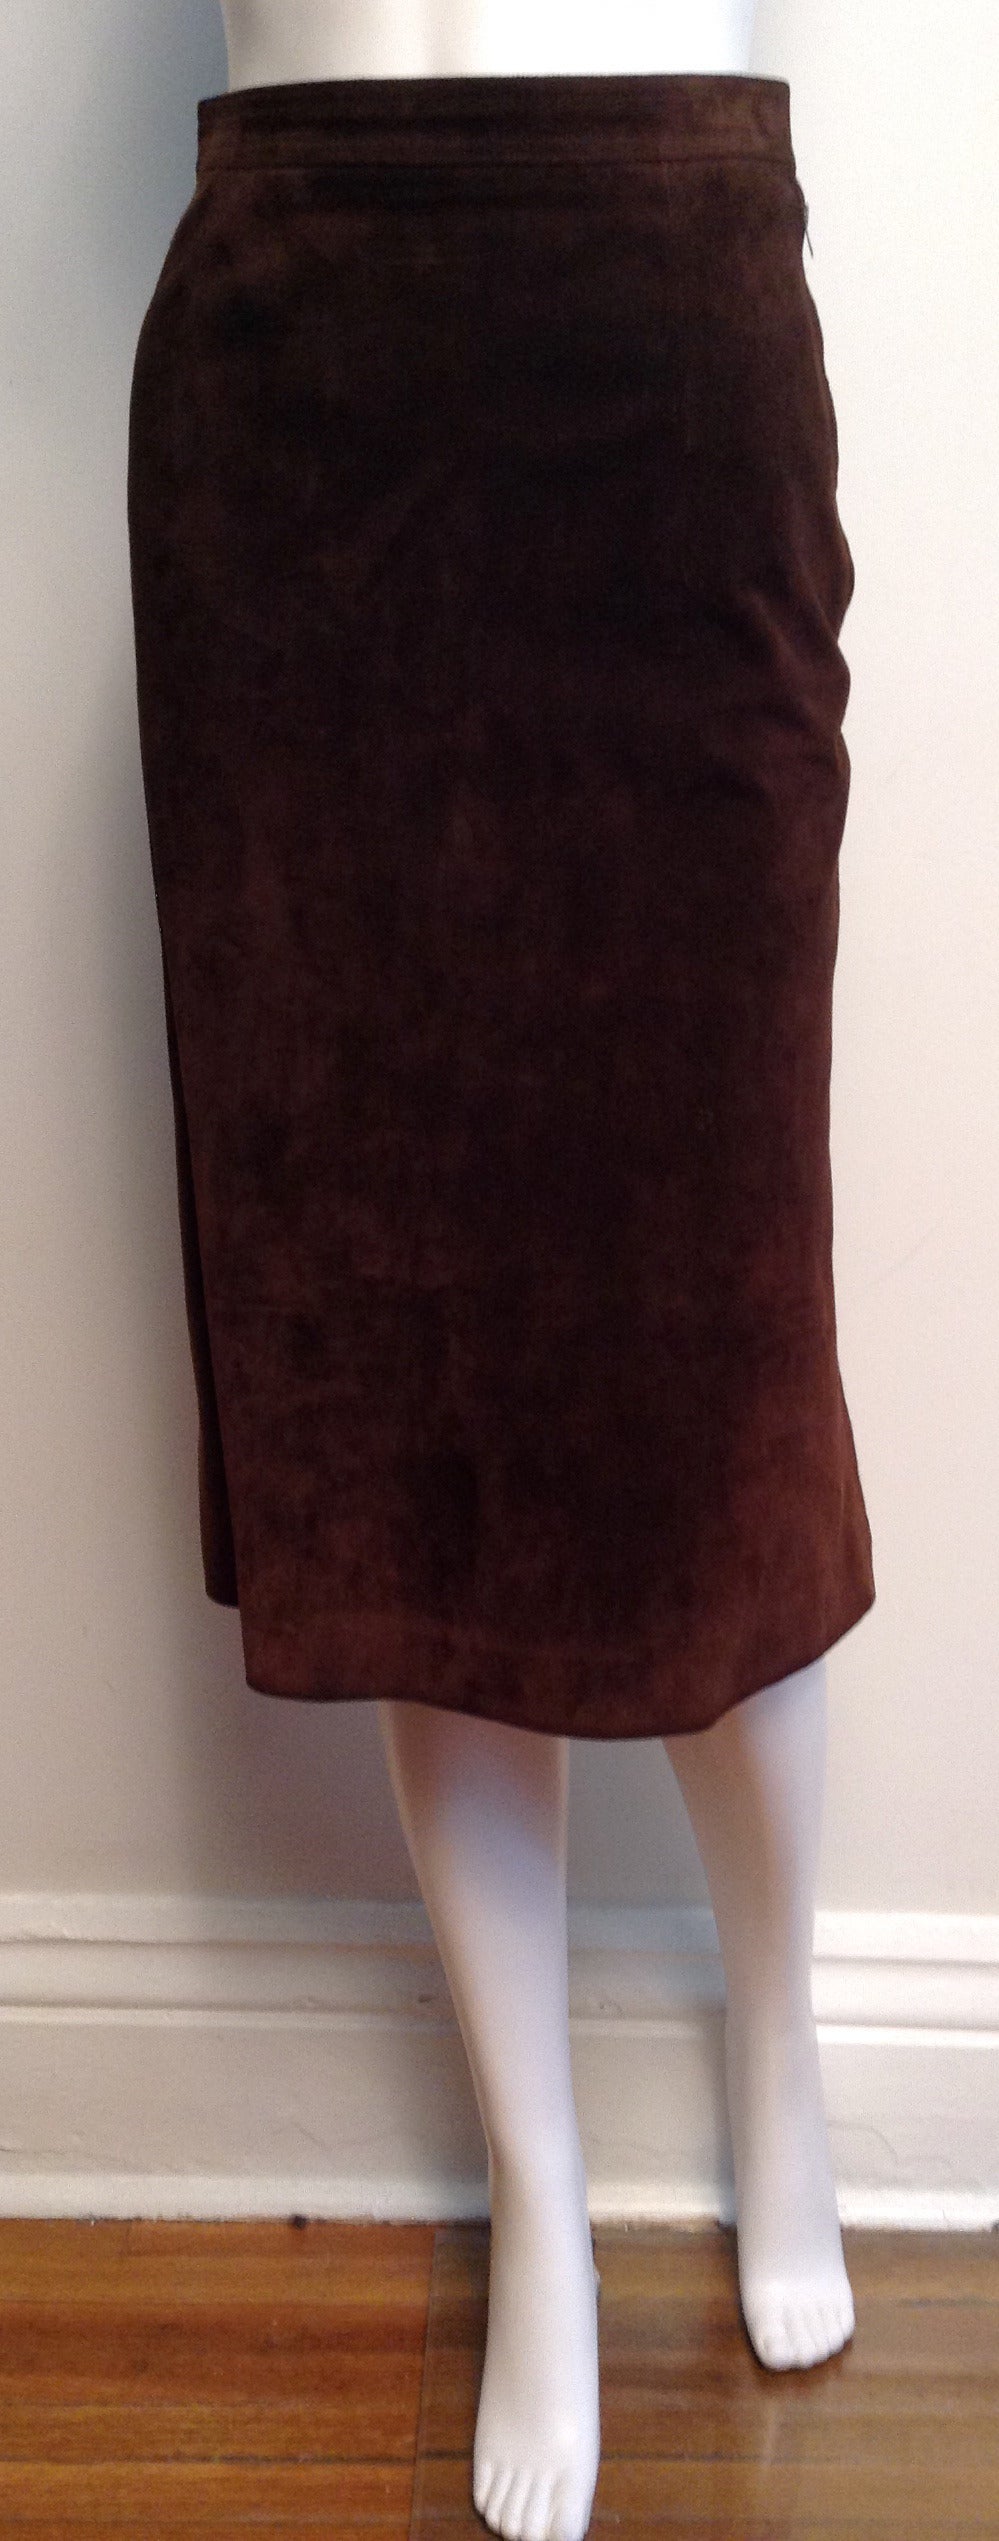 Soft brown suede jacket and skirt. Adorned with golden horsebits. 
Two pockets.

Measurements of jacket: 32